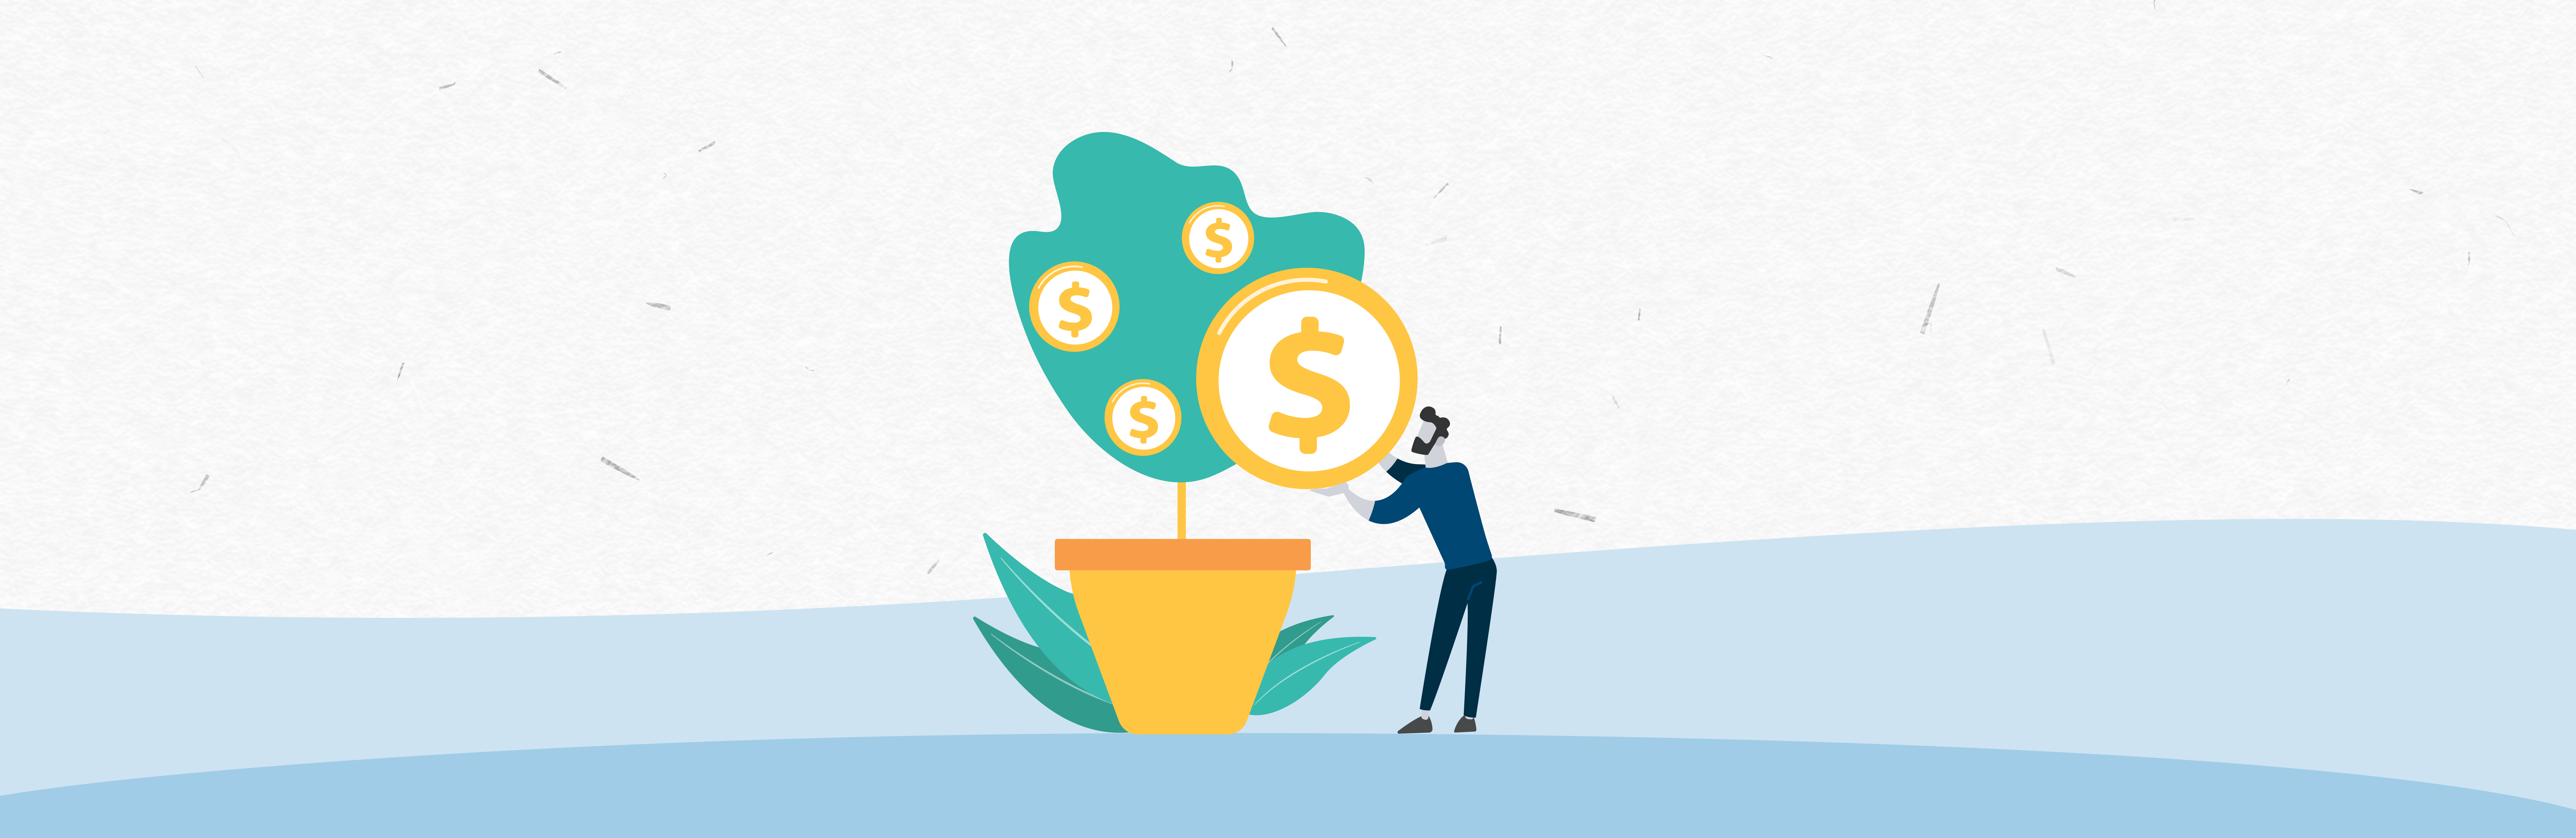 Illustrated man pulling a coin from a potted tree